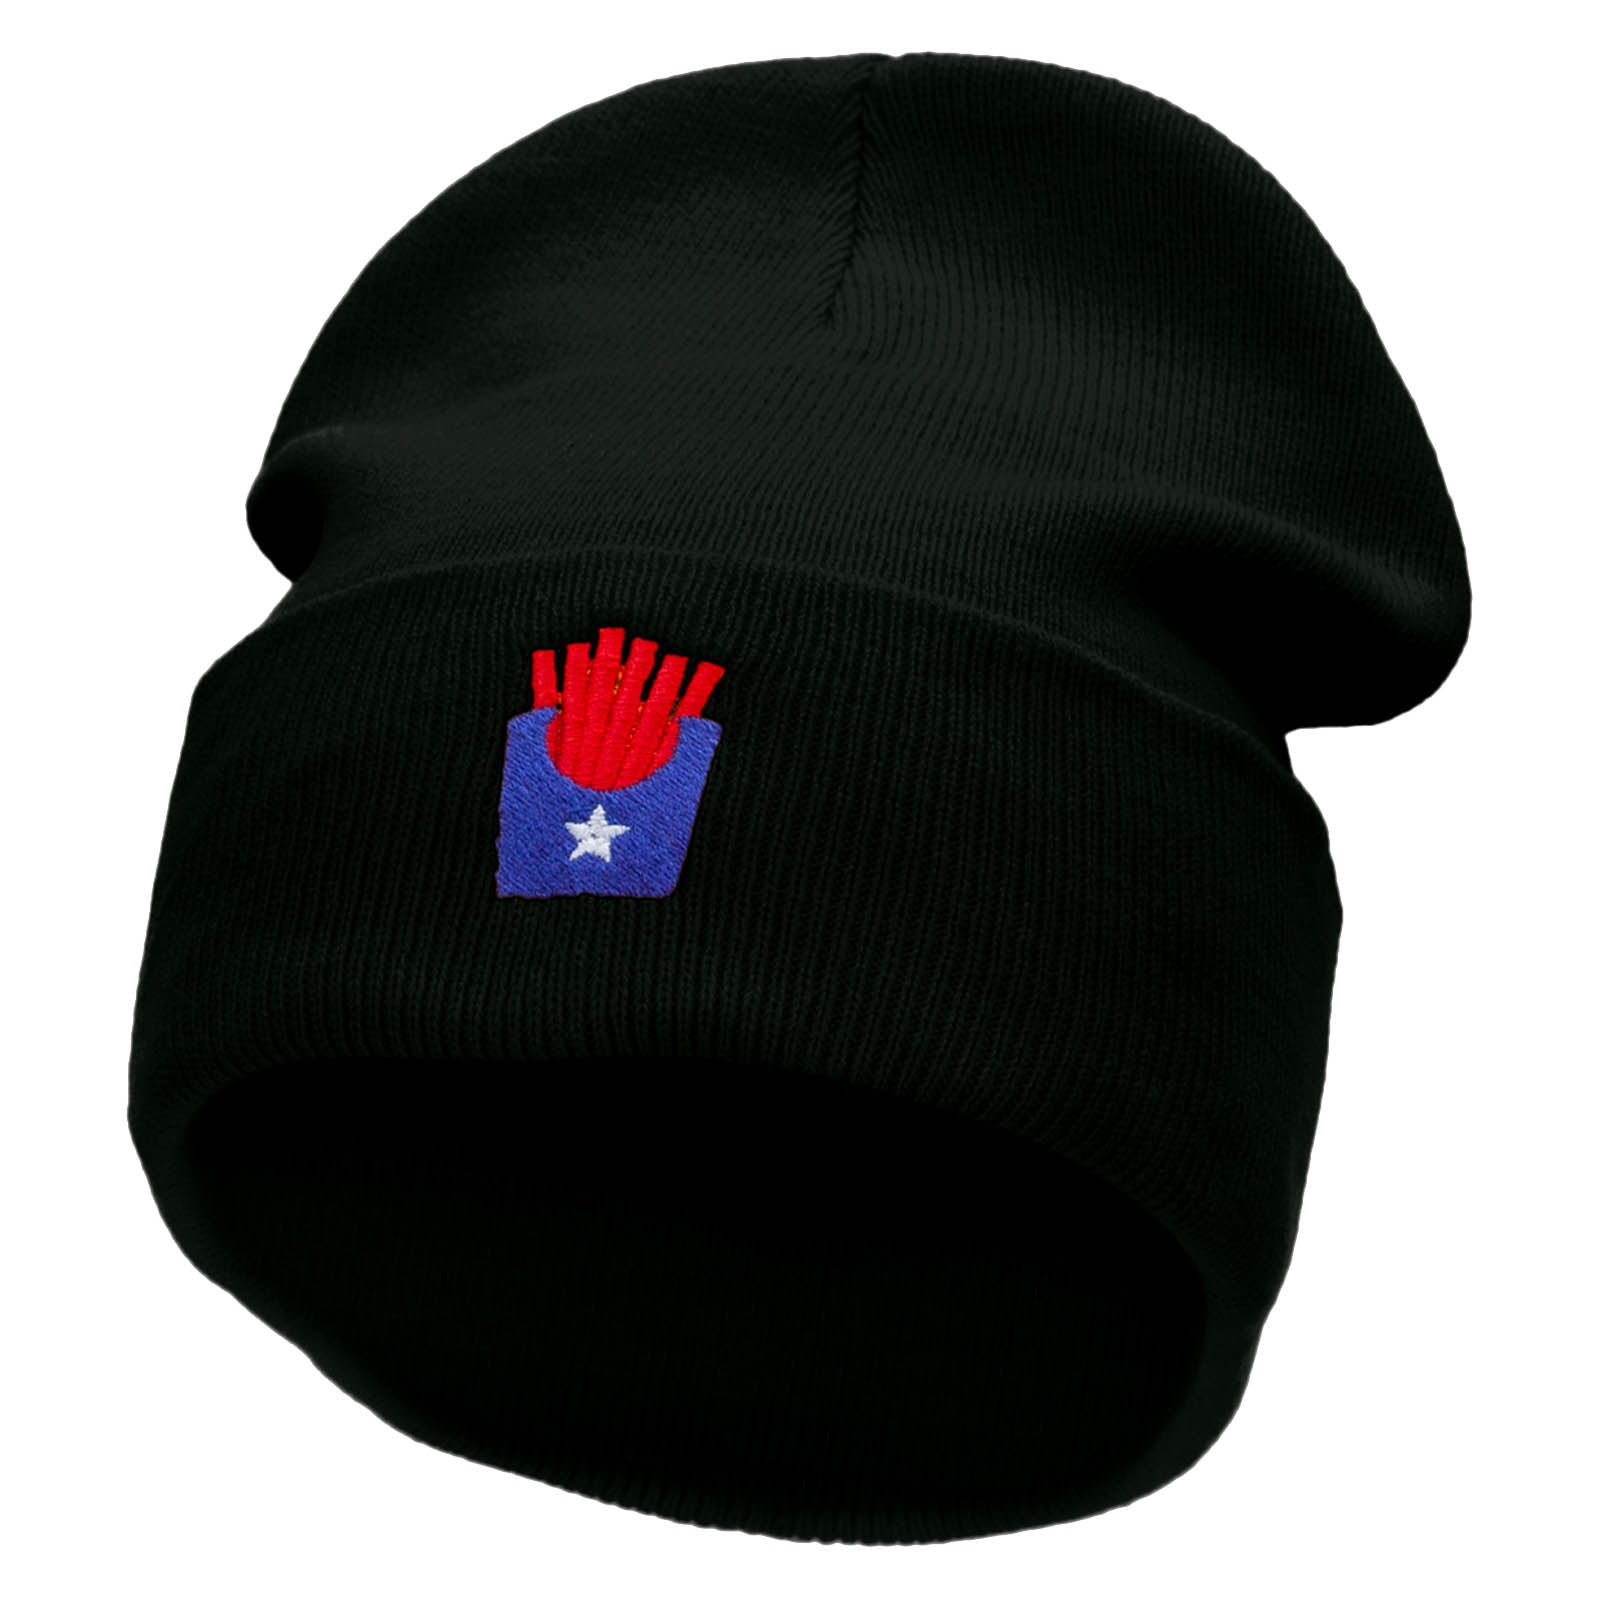 Patriotic Fries Embroidered 12 inch Acrylic Blank Cuff Long Beanie - Black OSFM